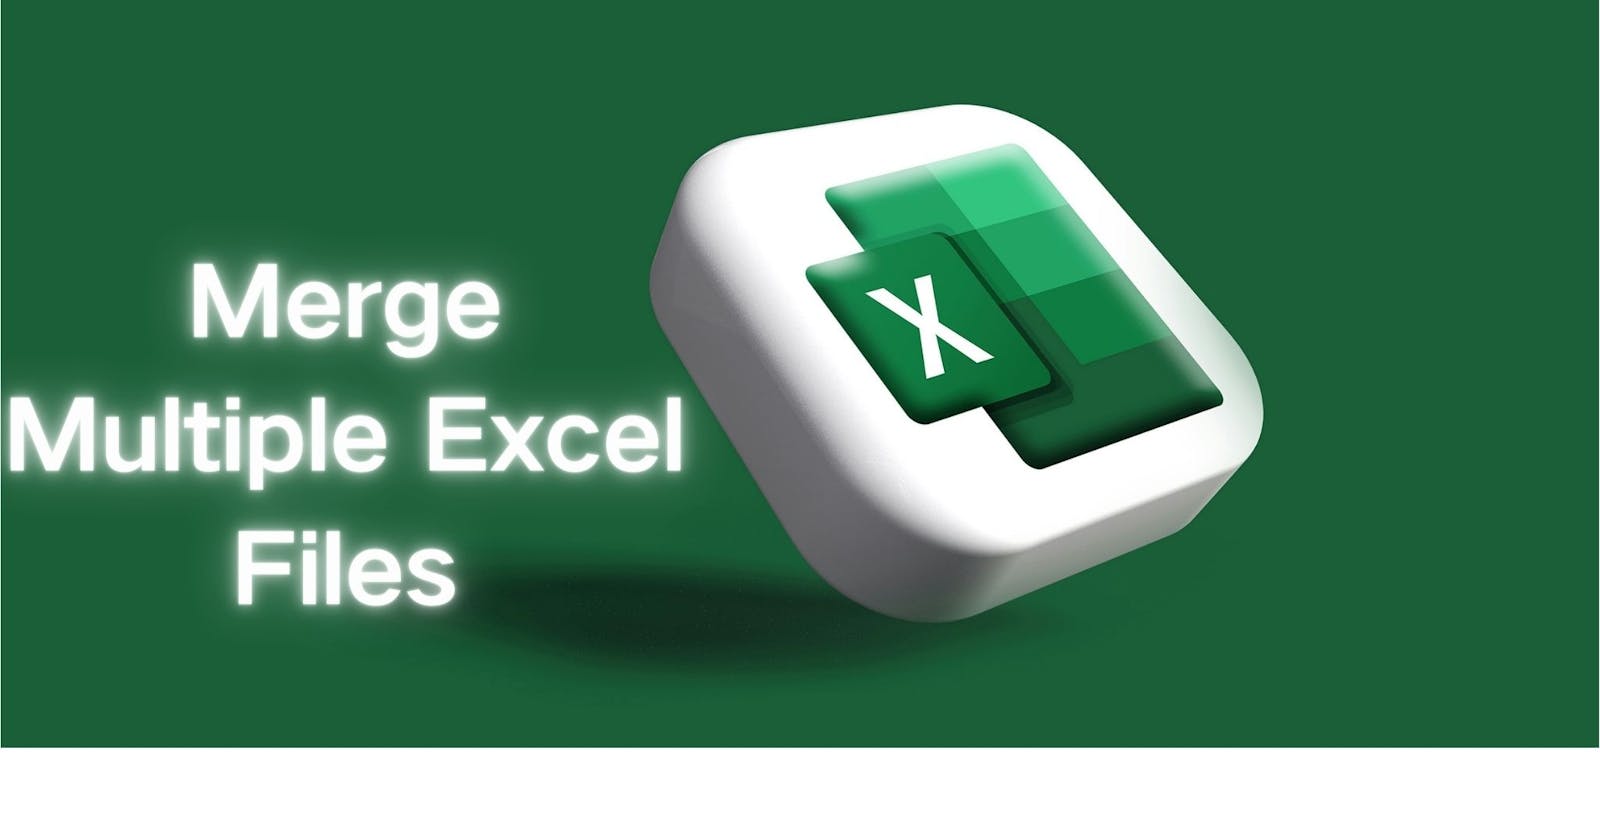 How to Quickly Merge Multiple Excel Files